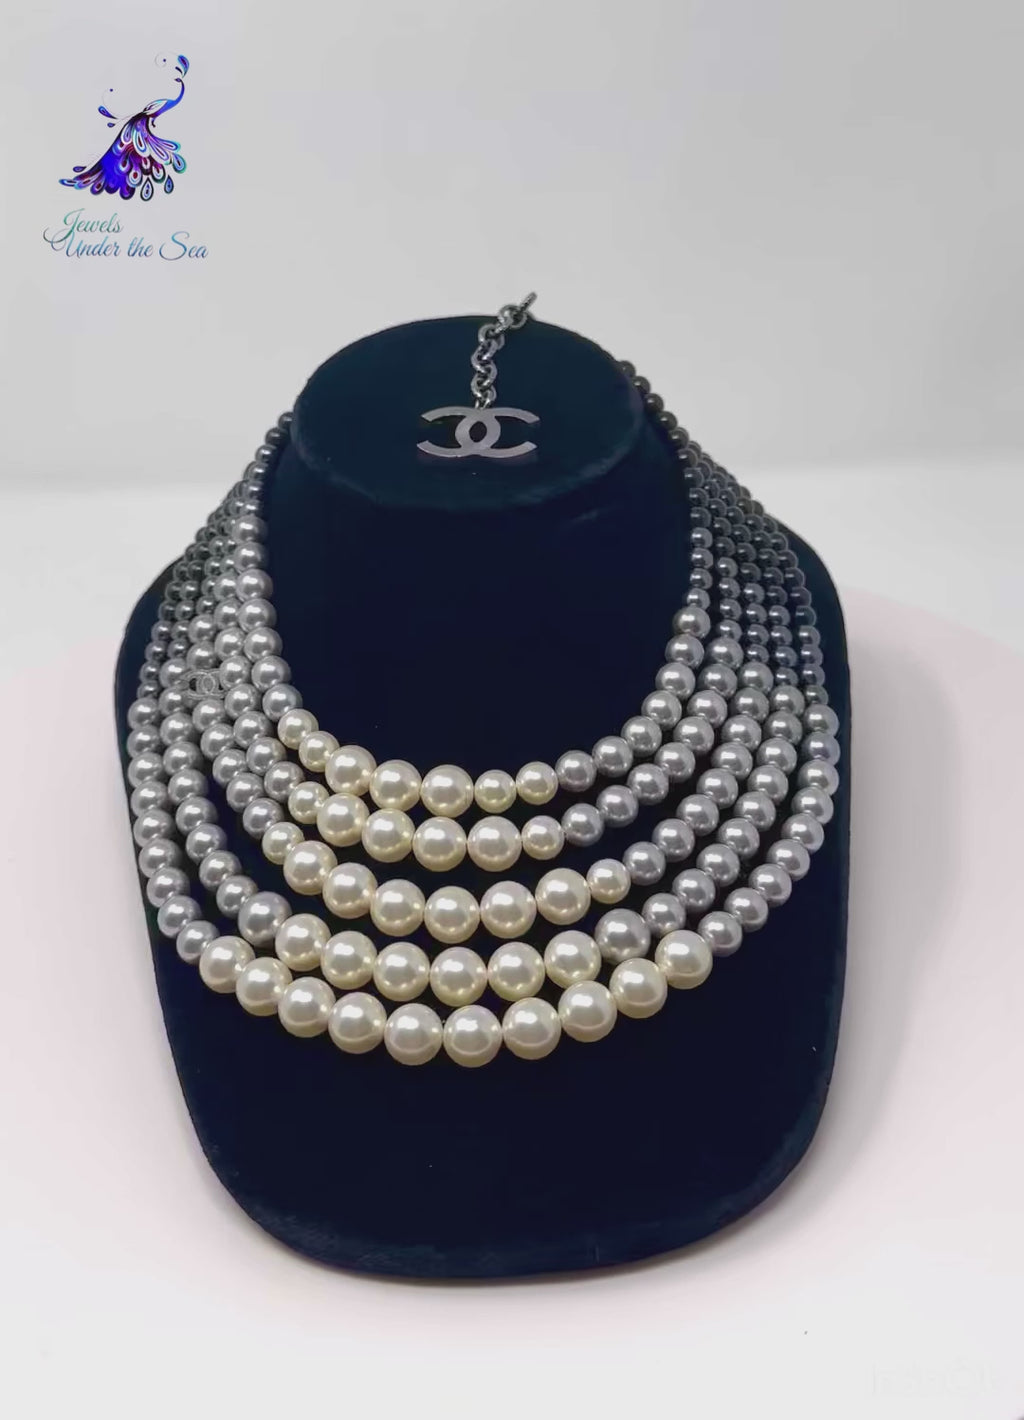 CHANEL Fall Winter 2015 4 Strand Black Gray Silver Pearl CC Necklace jewelsunderthesea 